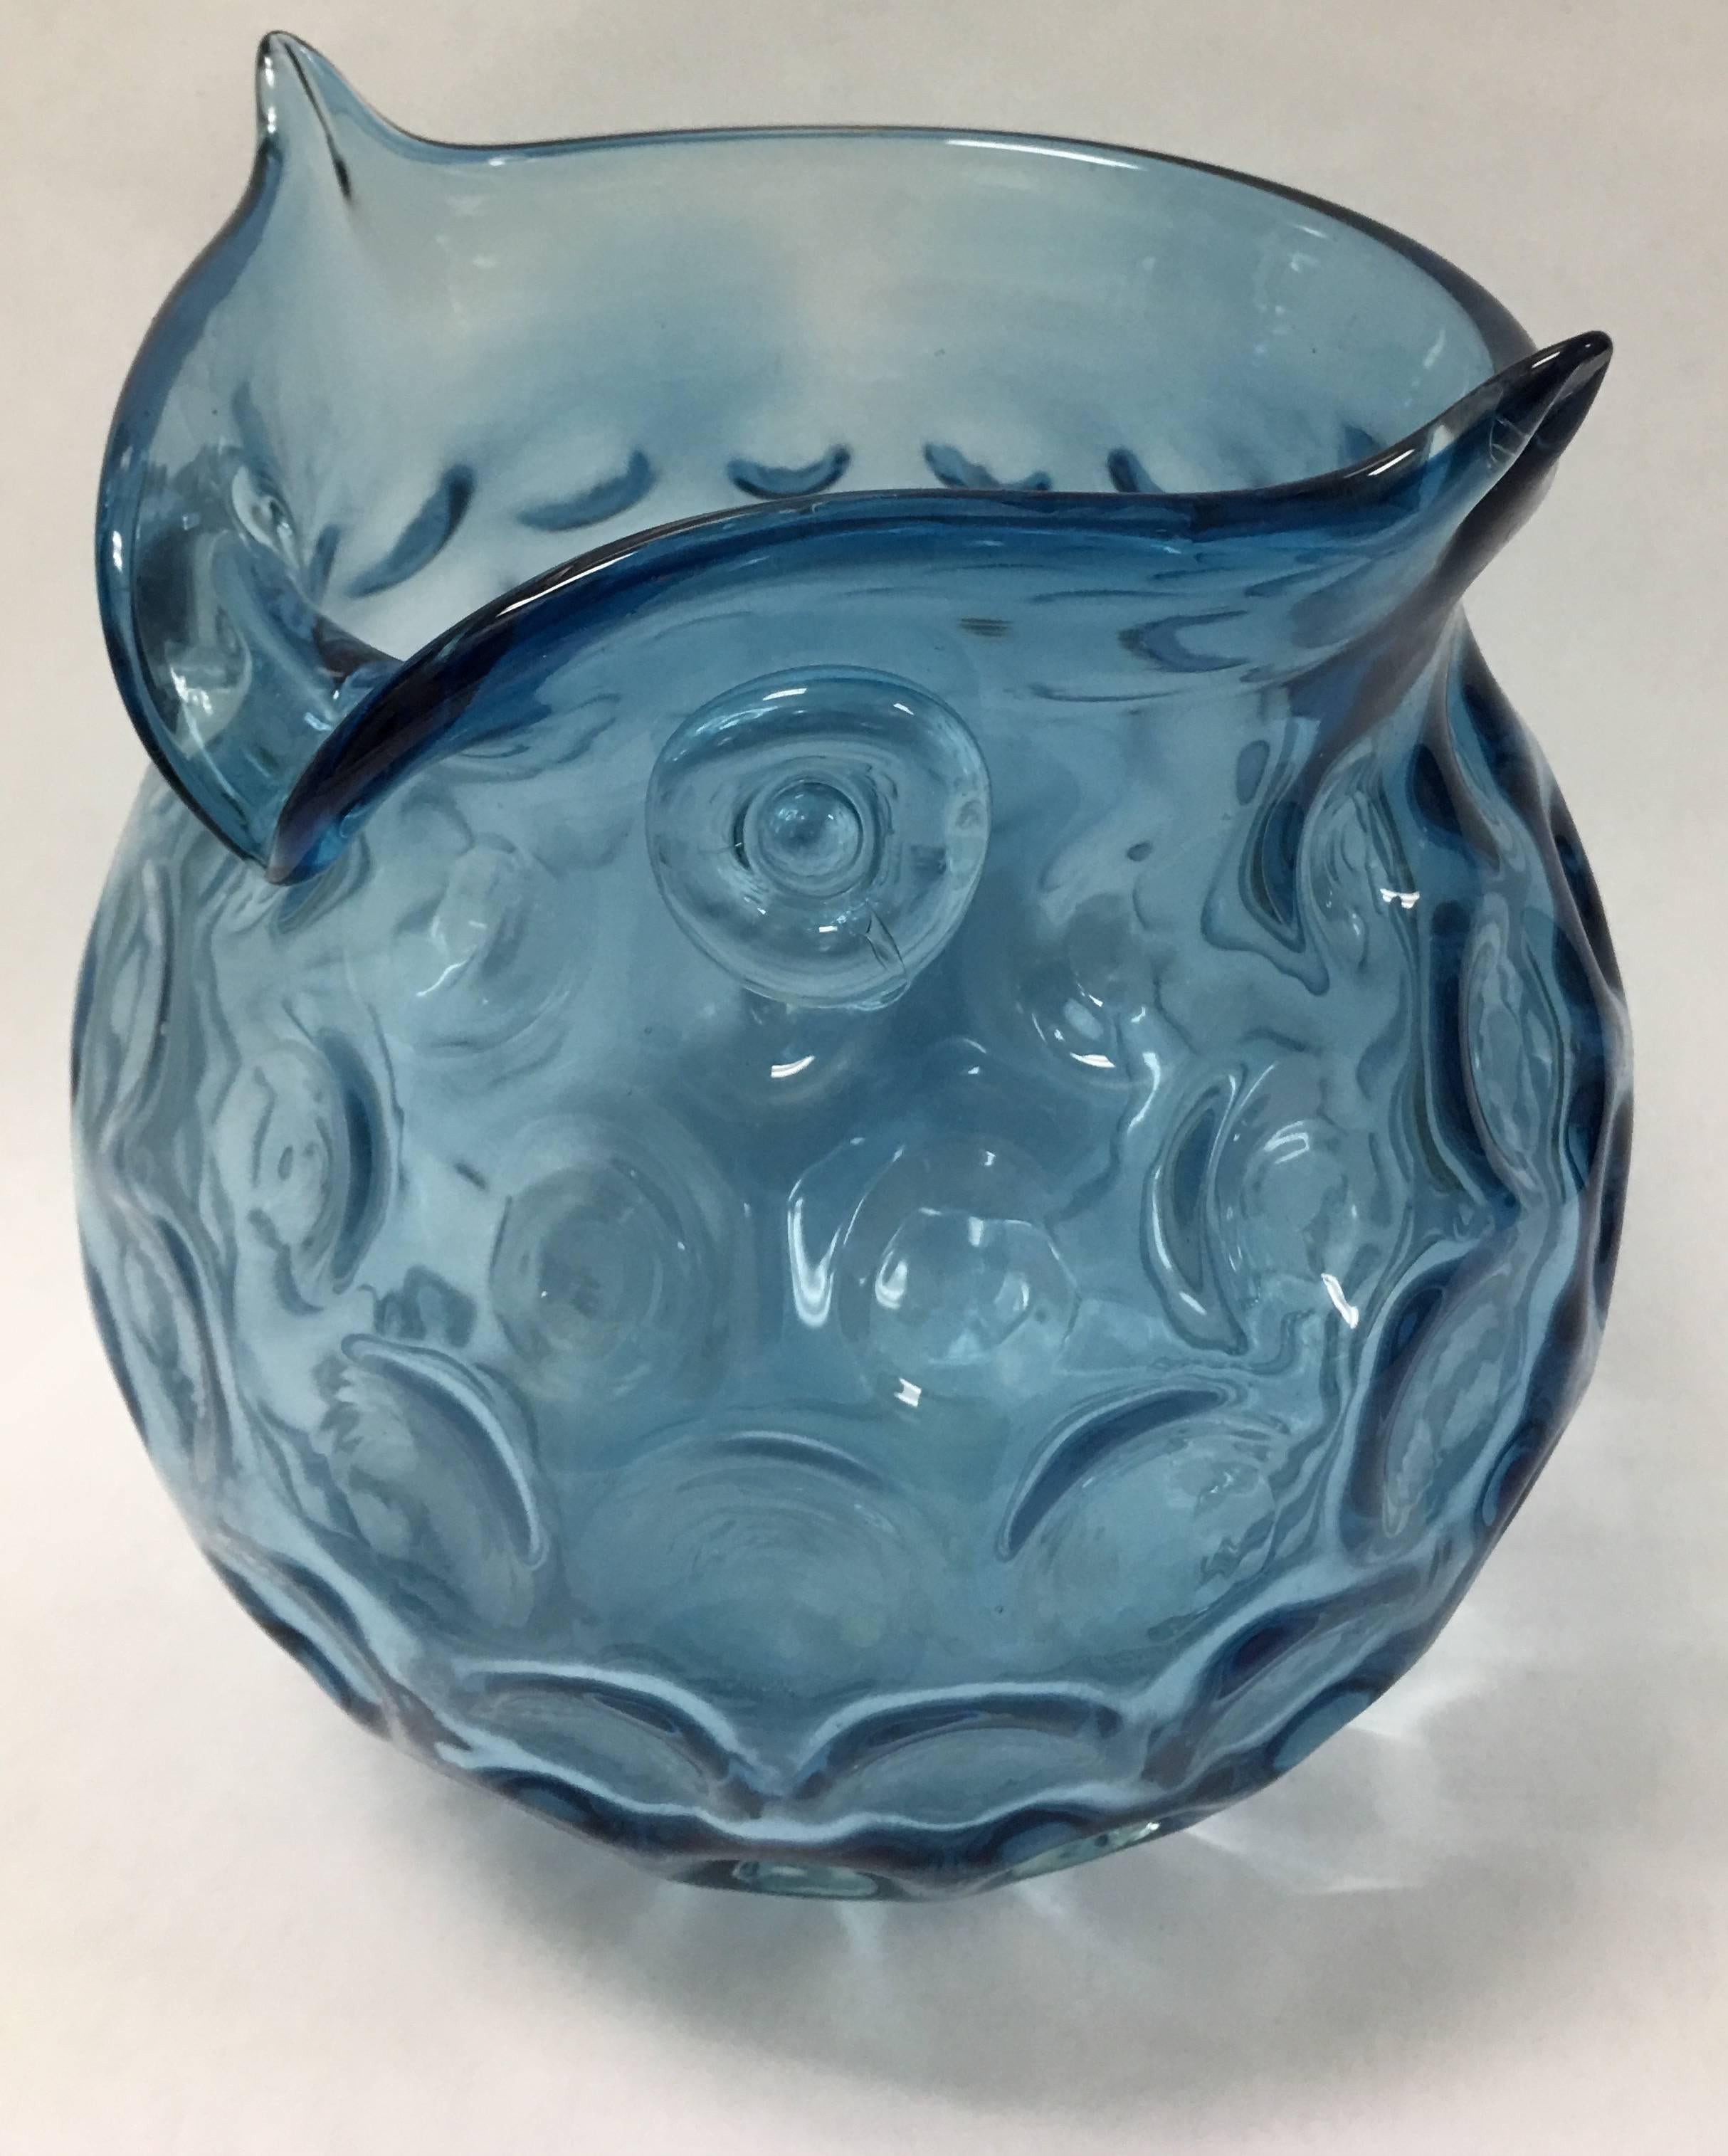 Blue Murano glass bowl shaped like an owl. Bowl retains Murano sticker on the underside.